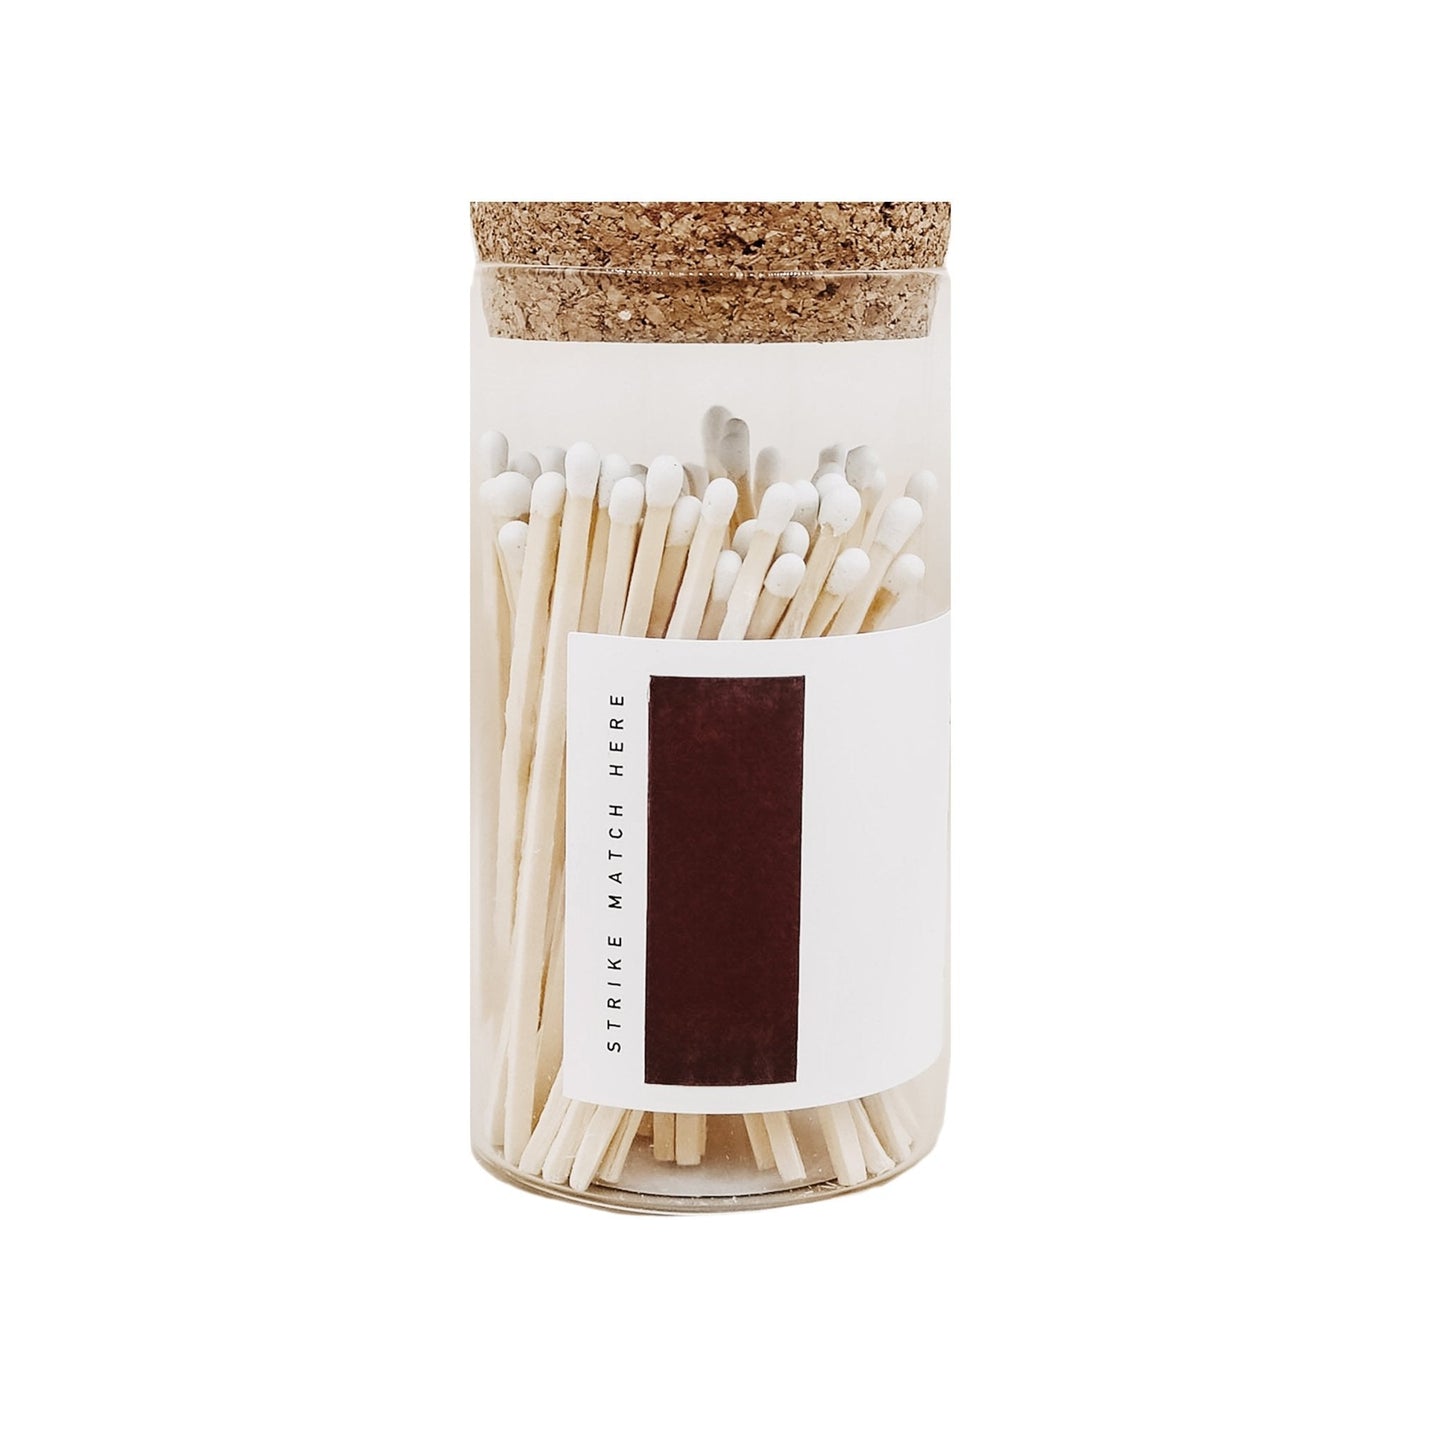 White Tip Medium Hearth Matches - 100 Count, 4" by Sweet Water Decor